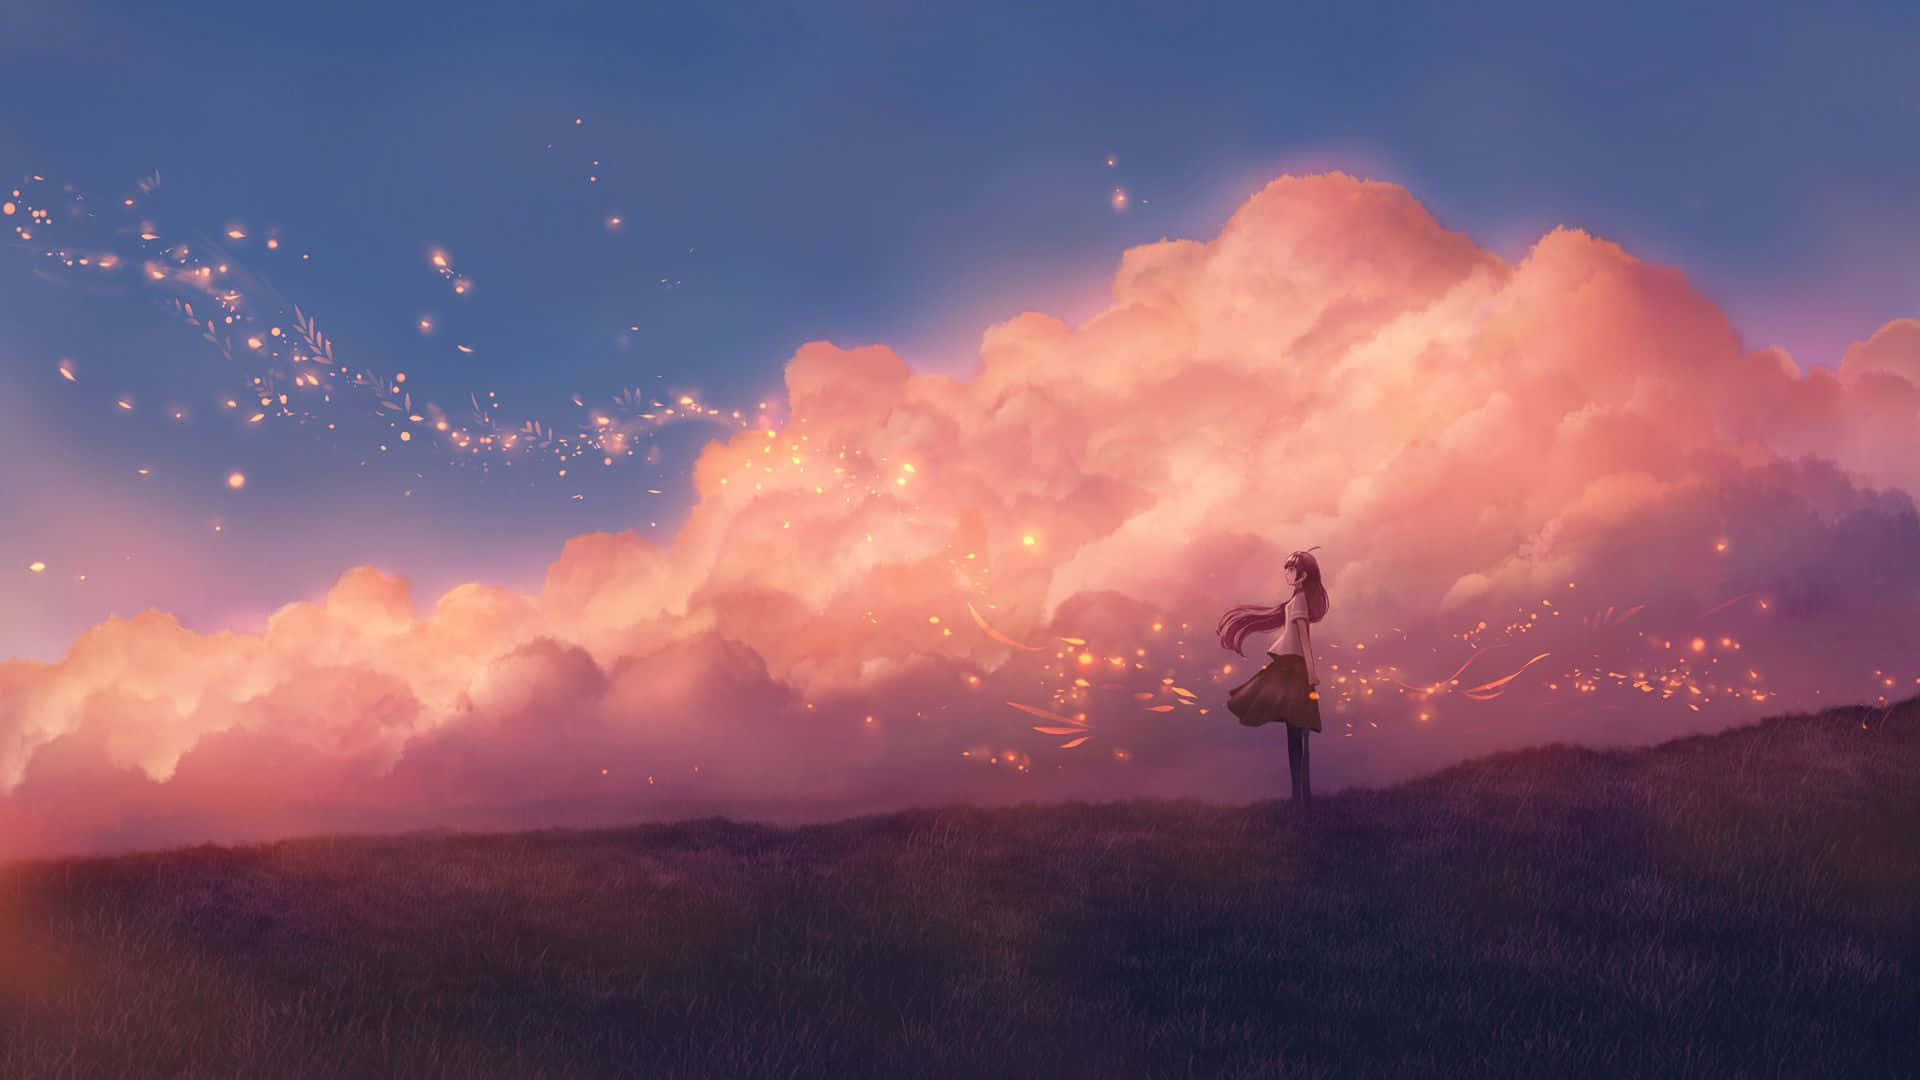 Bursting with vibrant pink, this anime background radiates serenity and relaxation.